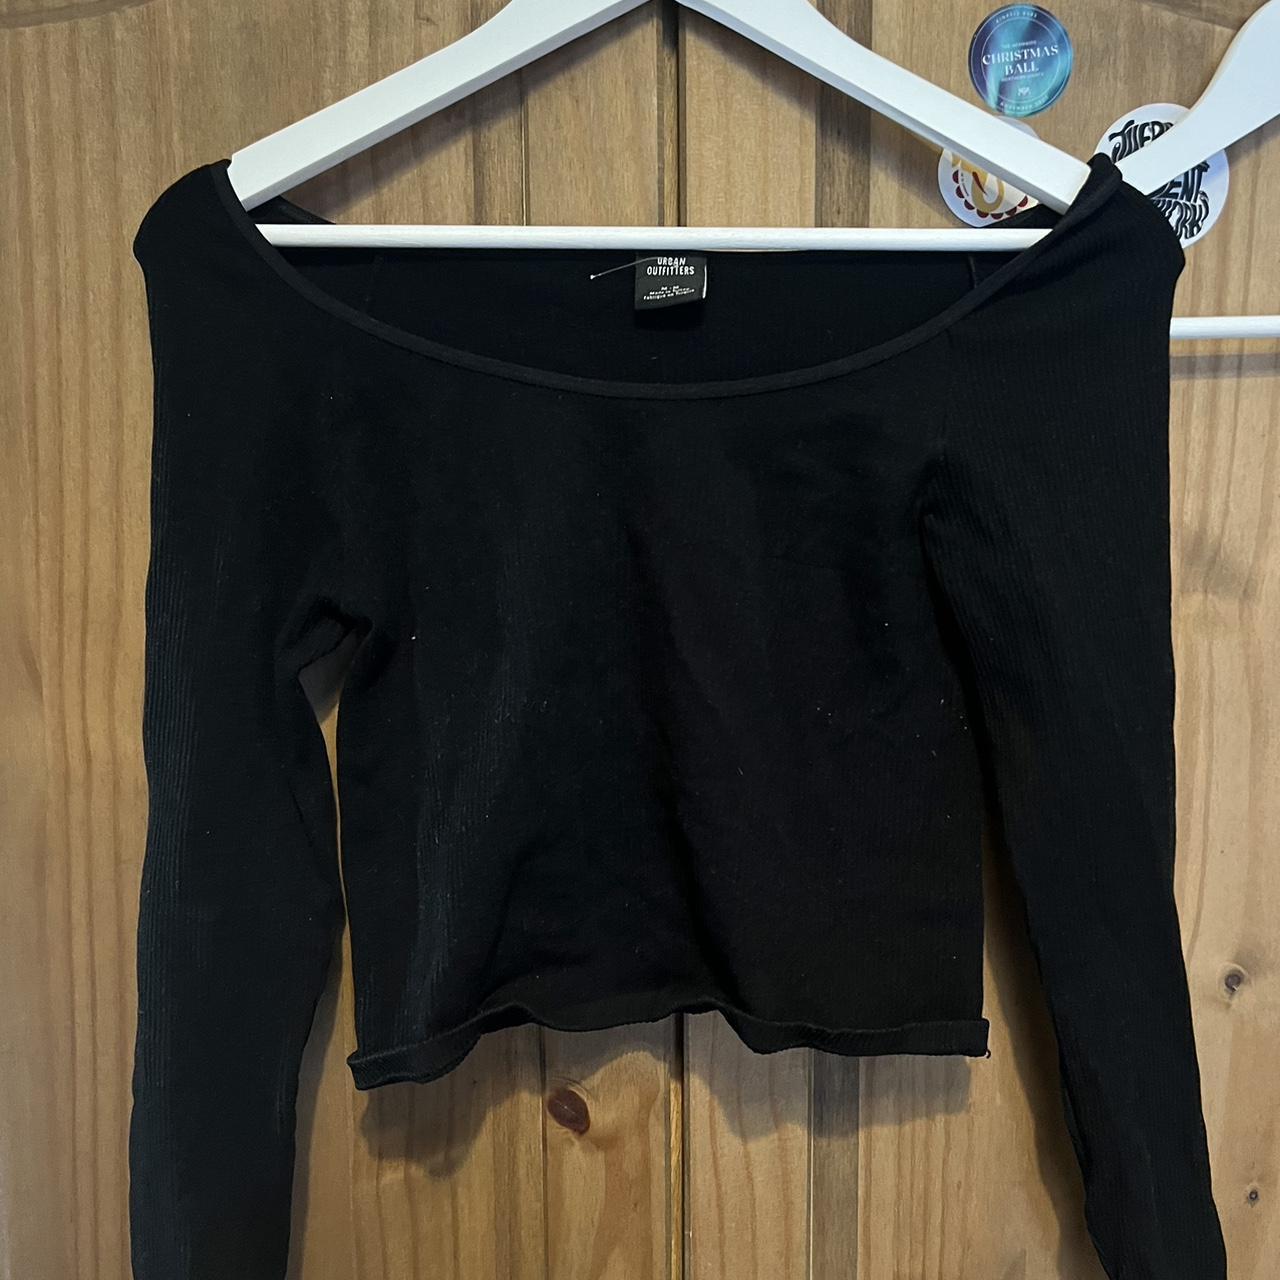 Urban outfitters wide neck long sleeve size medium... - Depop